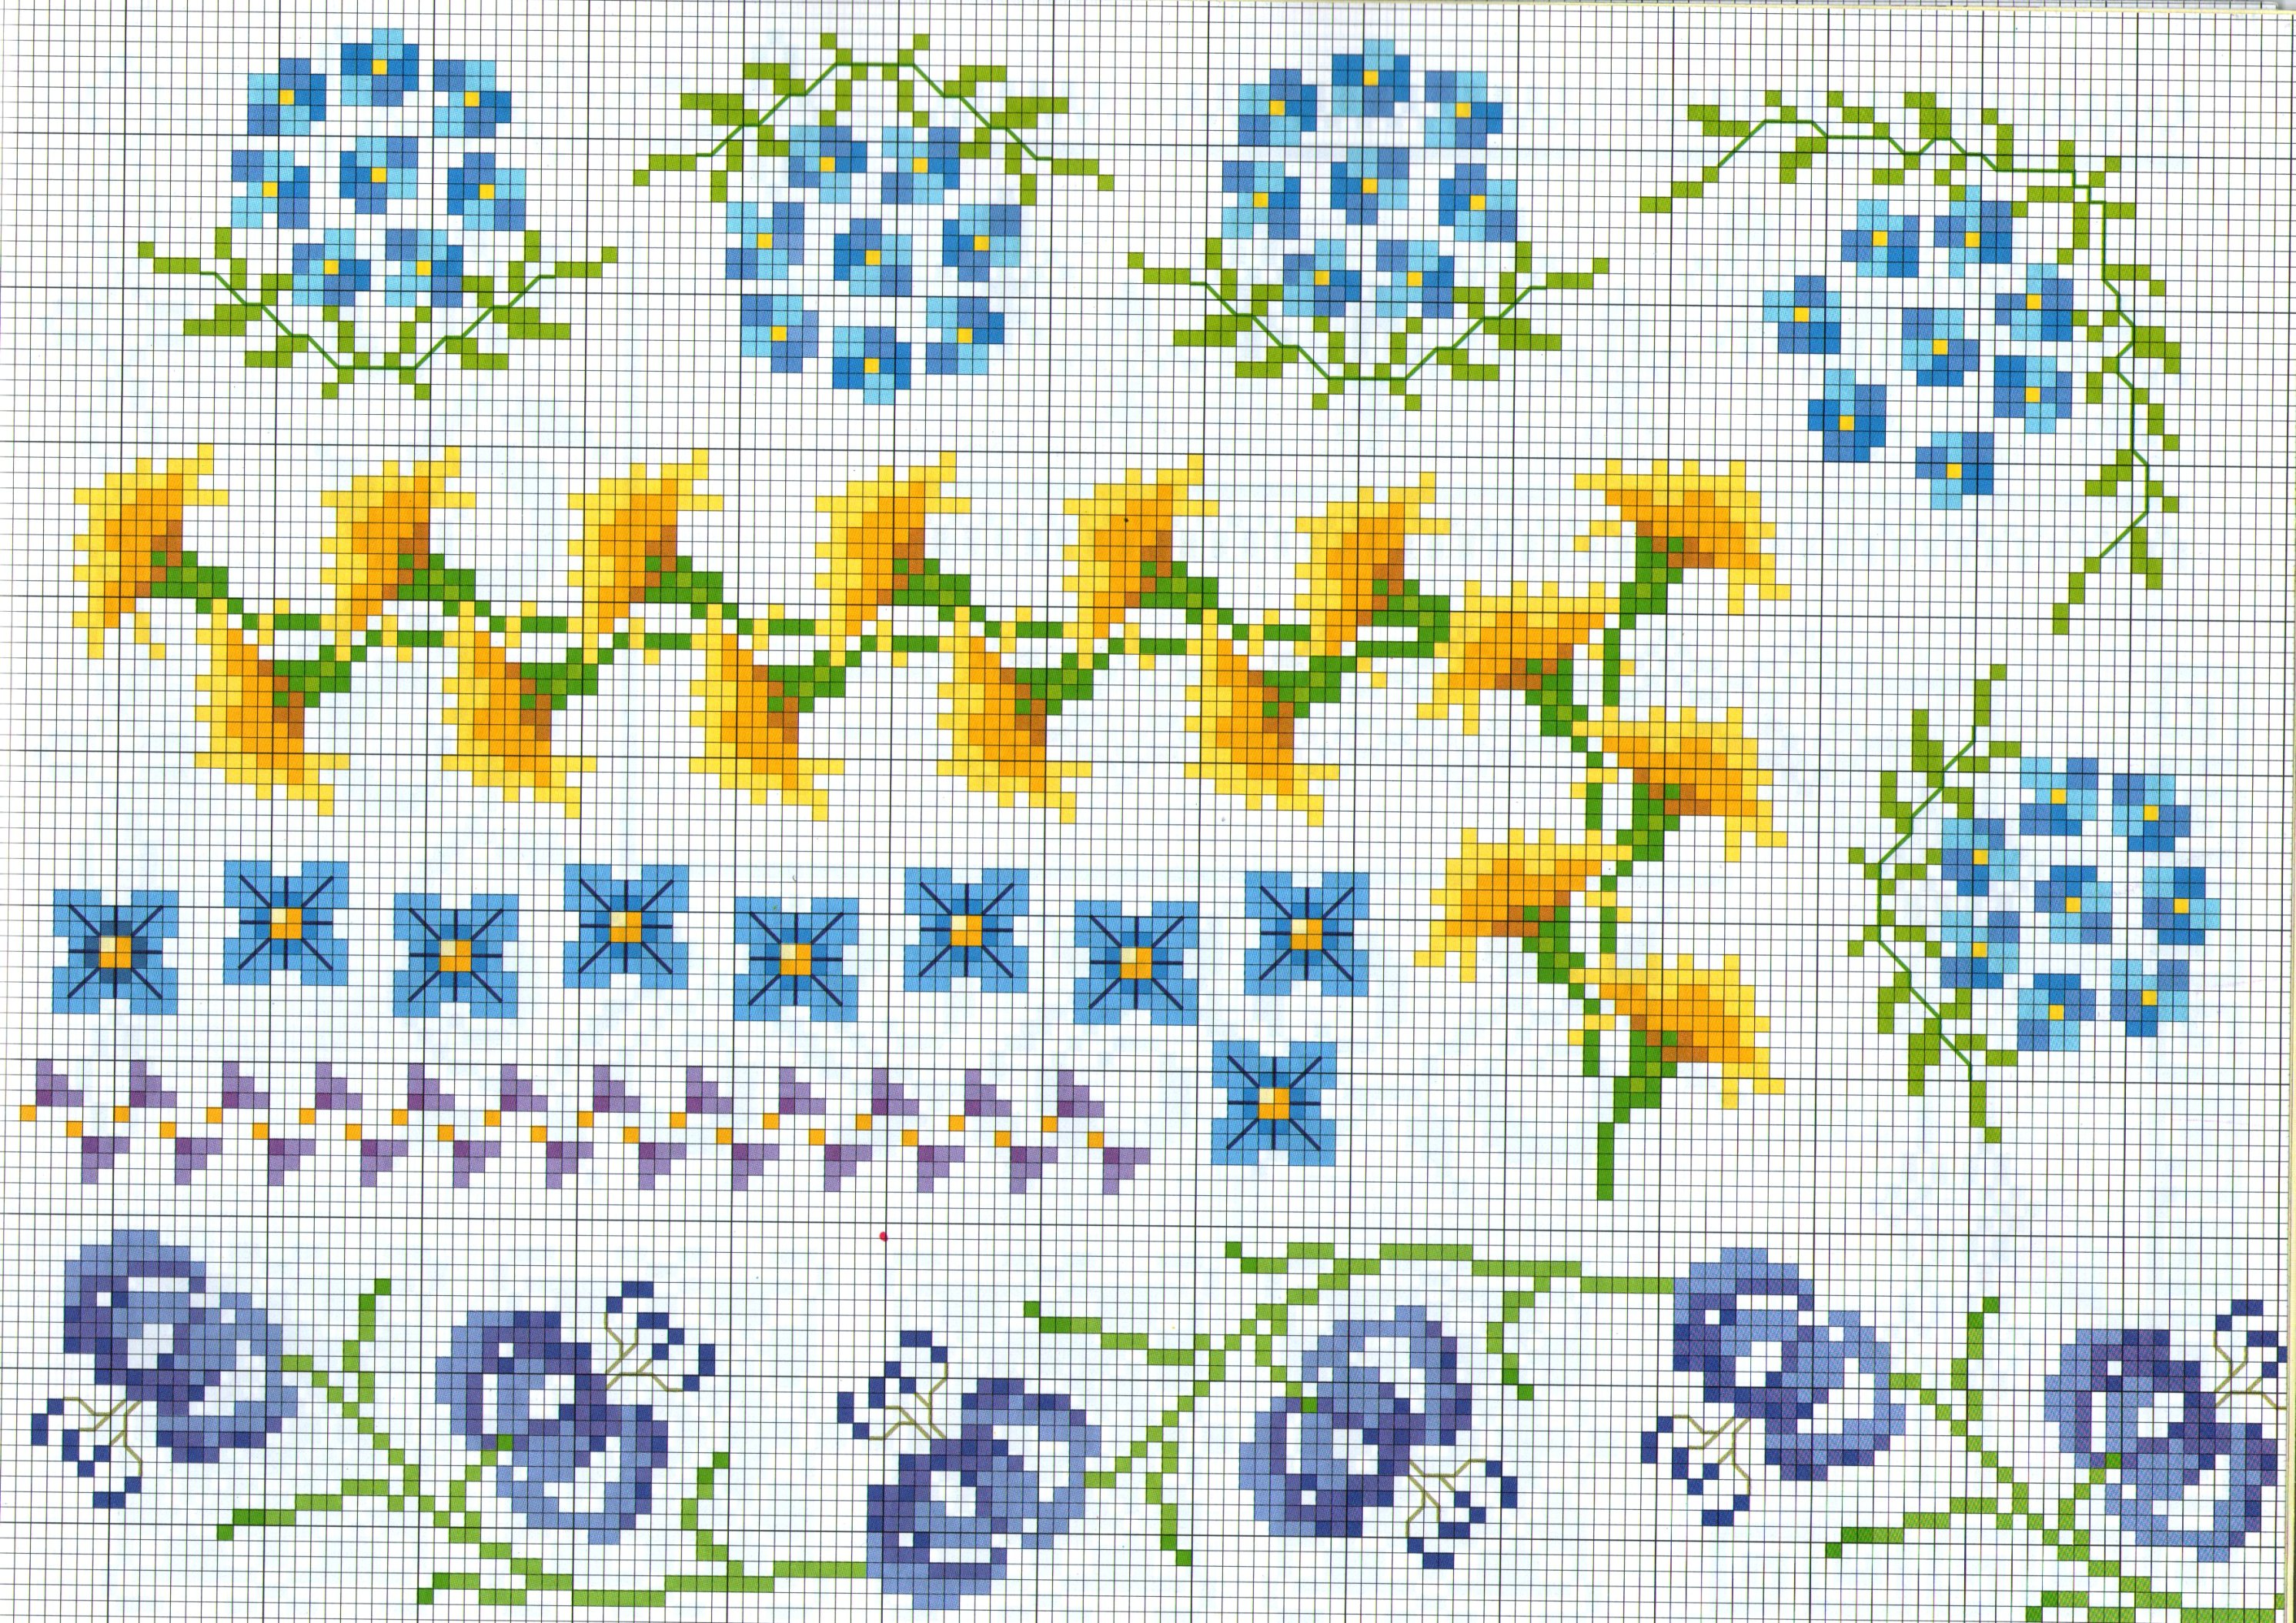 borders Cross stitch patterns with various flowers